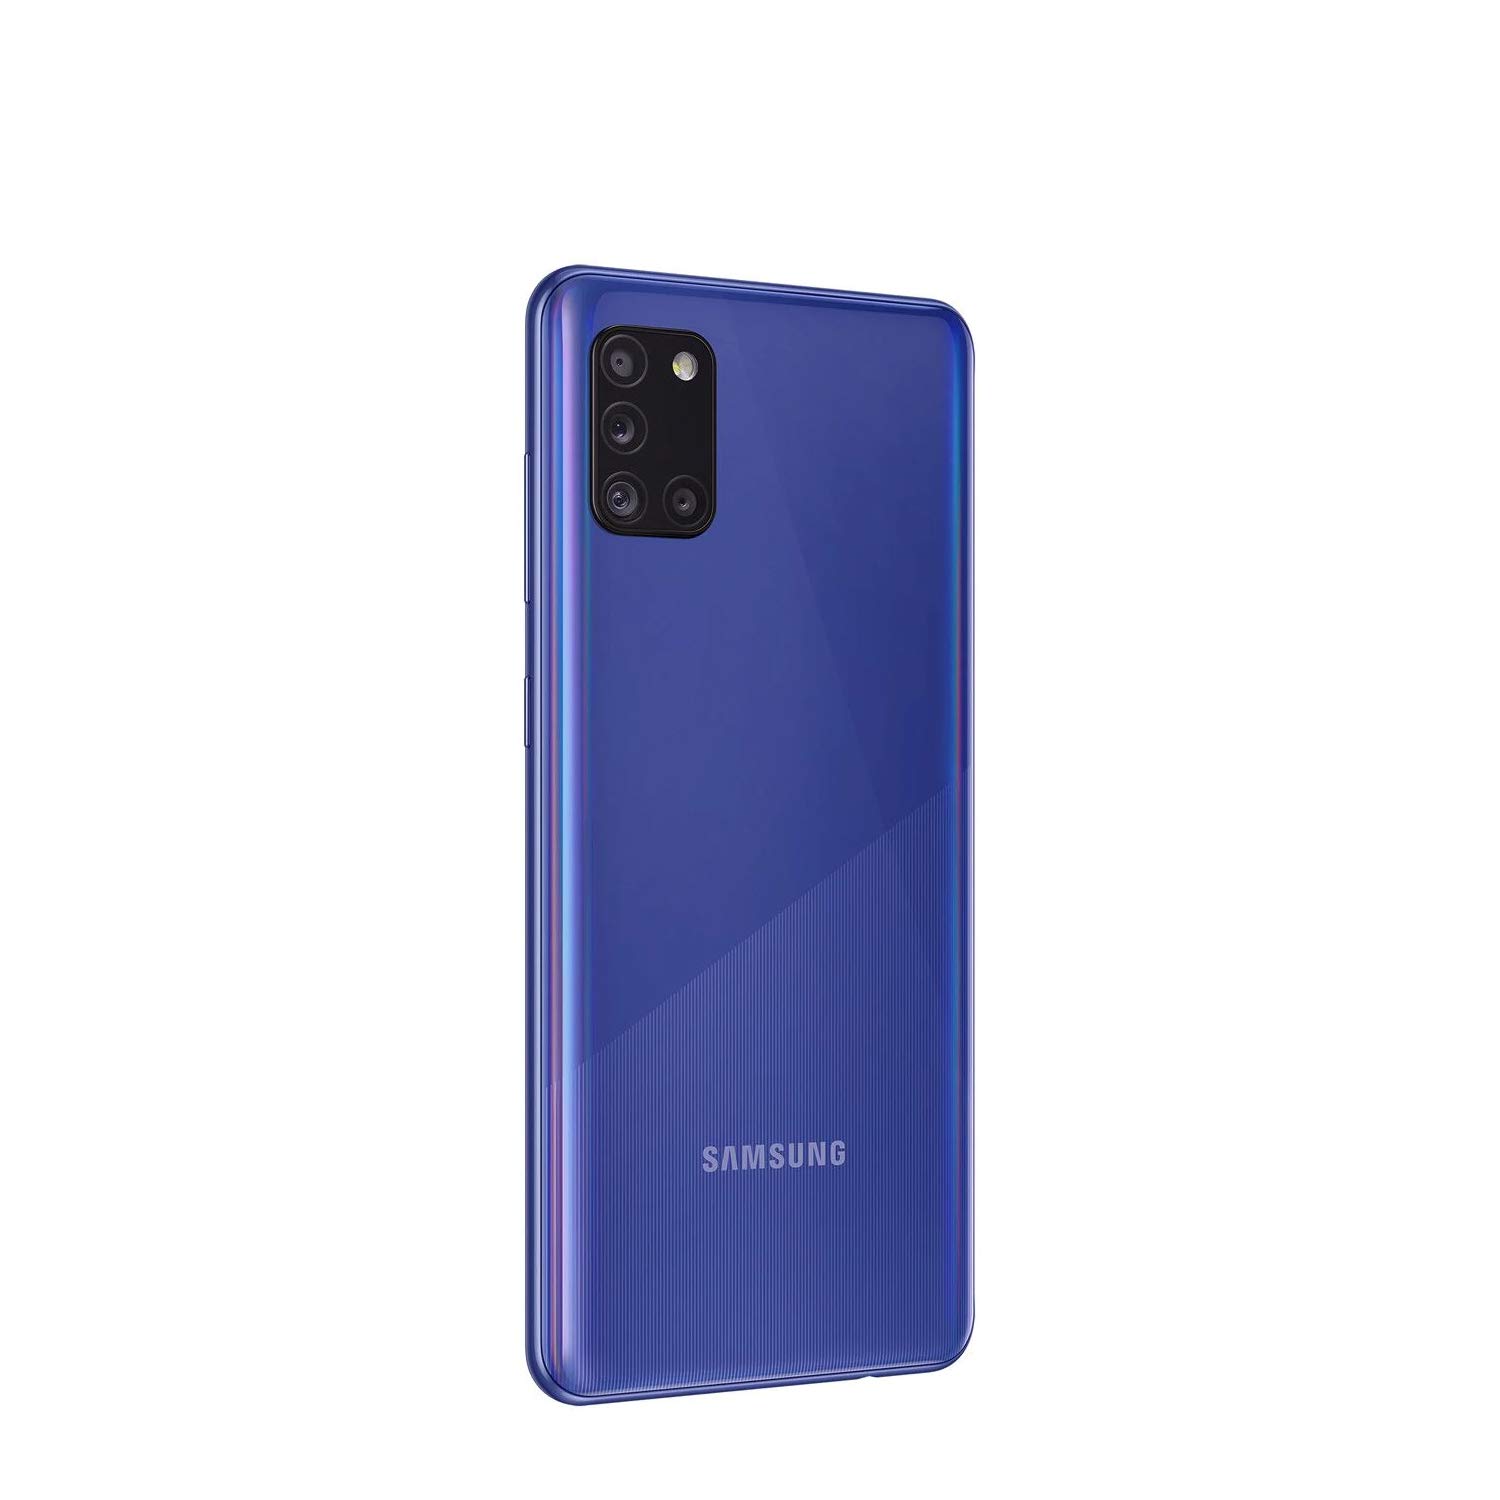 Samsung Galaxy A31 A315G 128GB Dual SIM GSM Unlocked Android Smartphone (International Variant/US Compatible LTE) - Prism Crush Blue